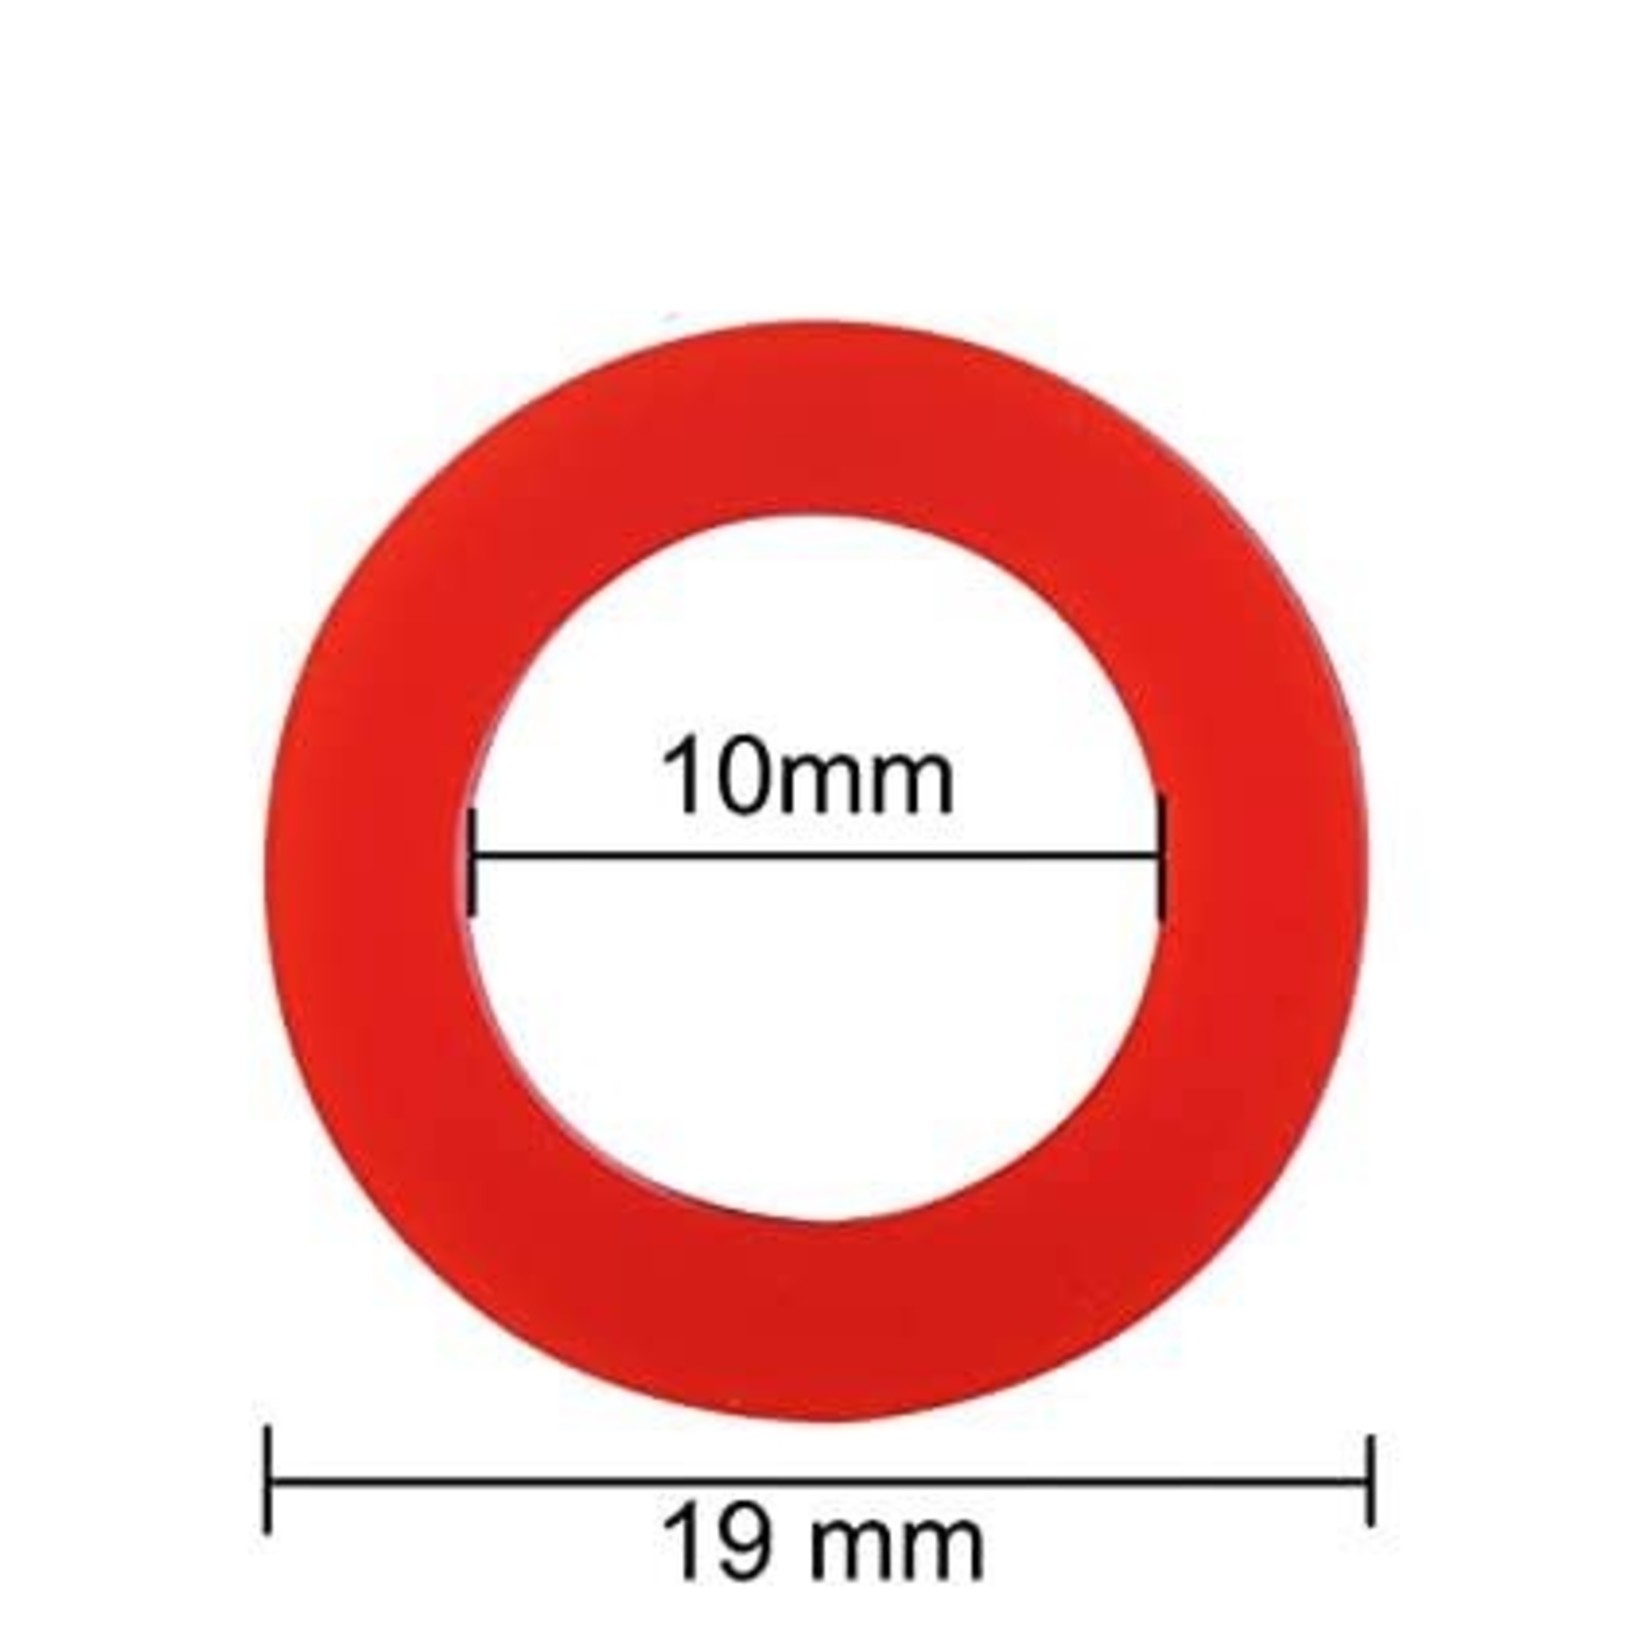 Replacement Rubber Washers for Shower Hose - 2 Pack